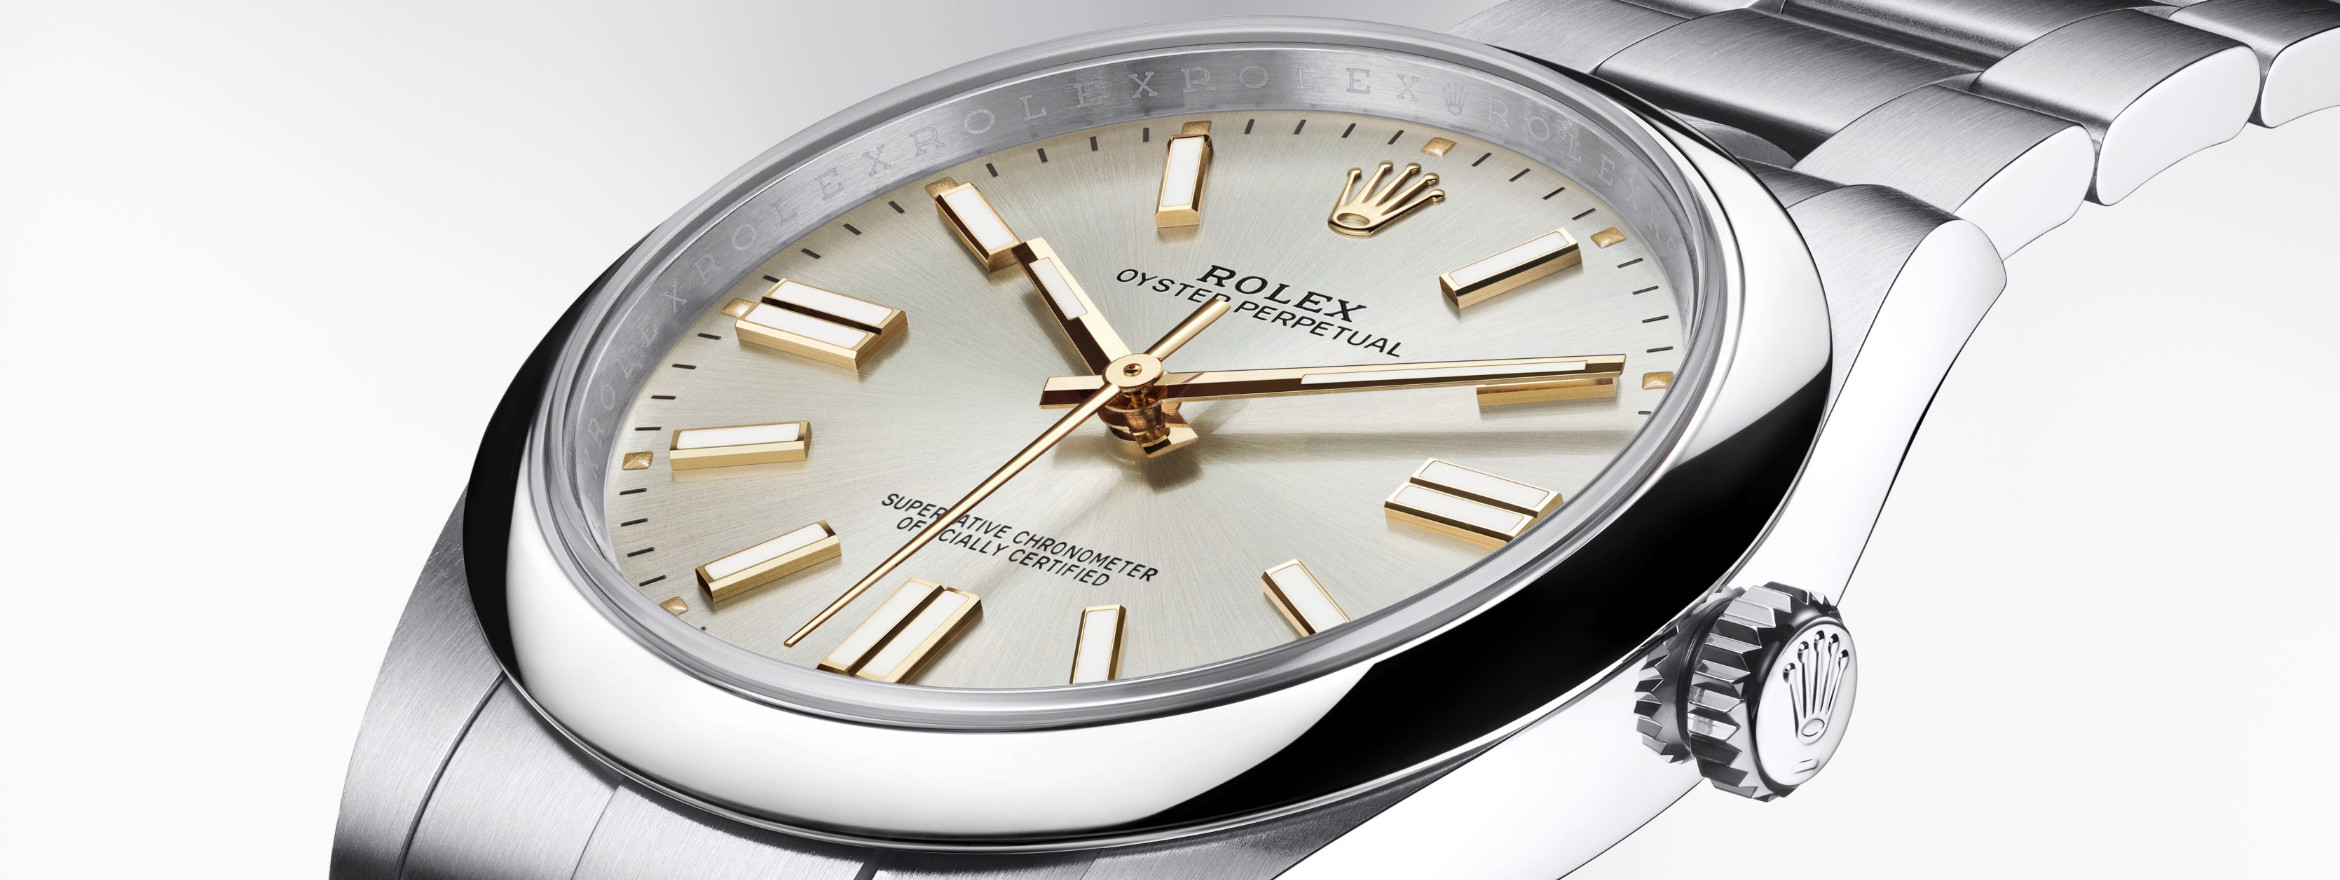 Rolex New Watches 2020: Oyster Perpetual